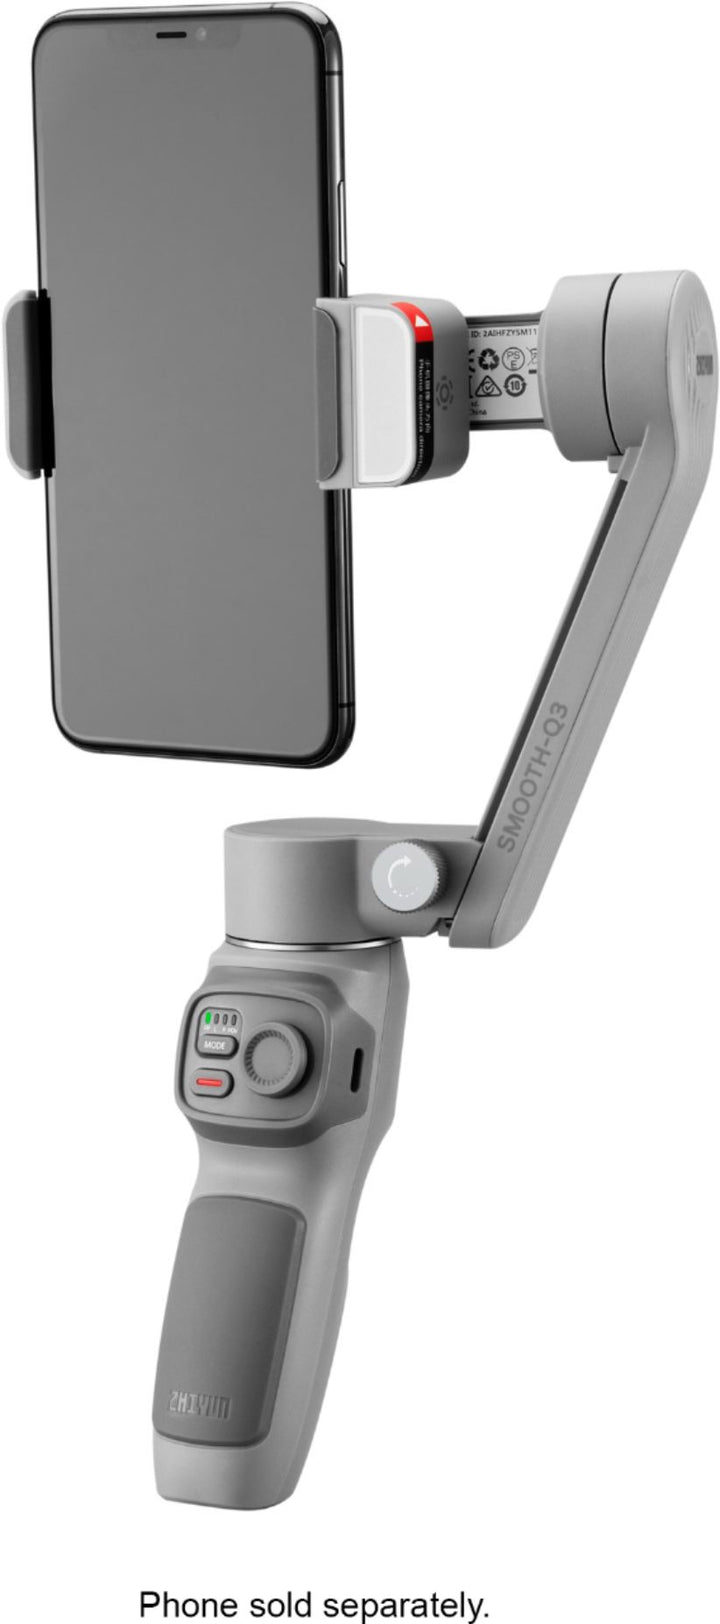 Zhiyun - Smooth Q-3 Compact Folding 3-Axis Gimbal Stabilizer for phones w/ Built-in LED Video Light with detachable tri-pod stand - Gray_18